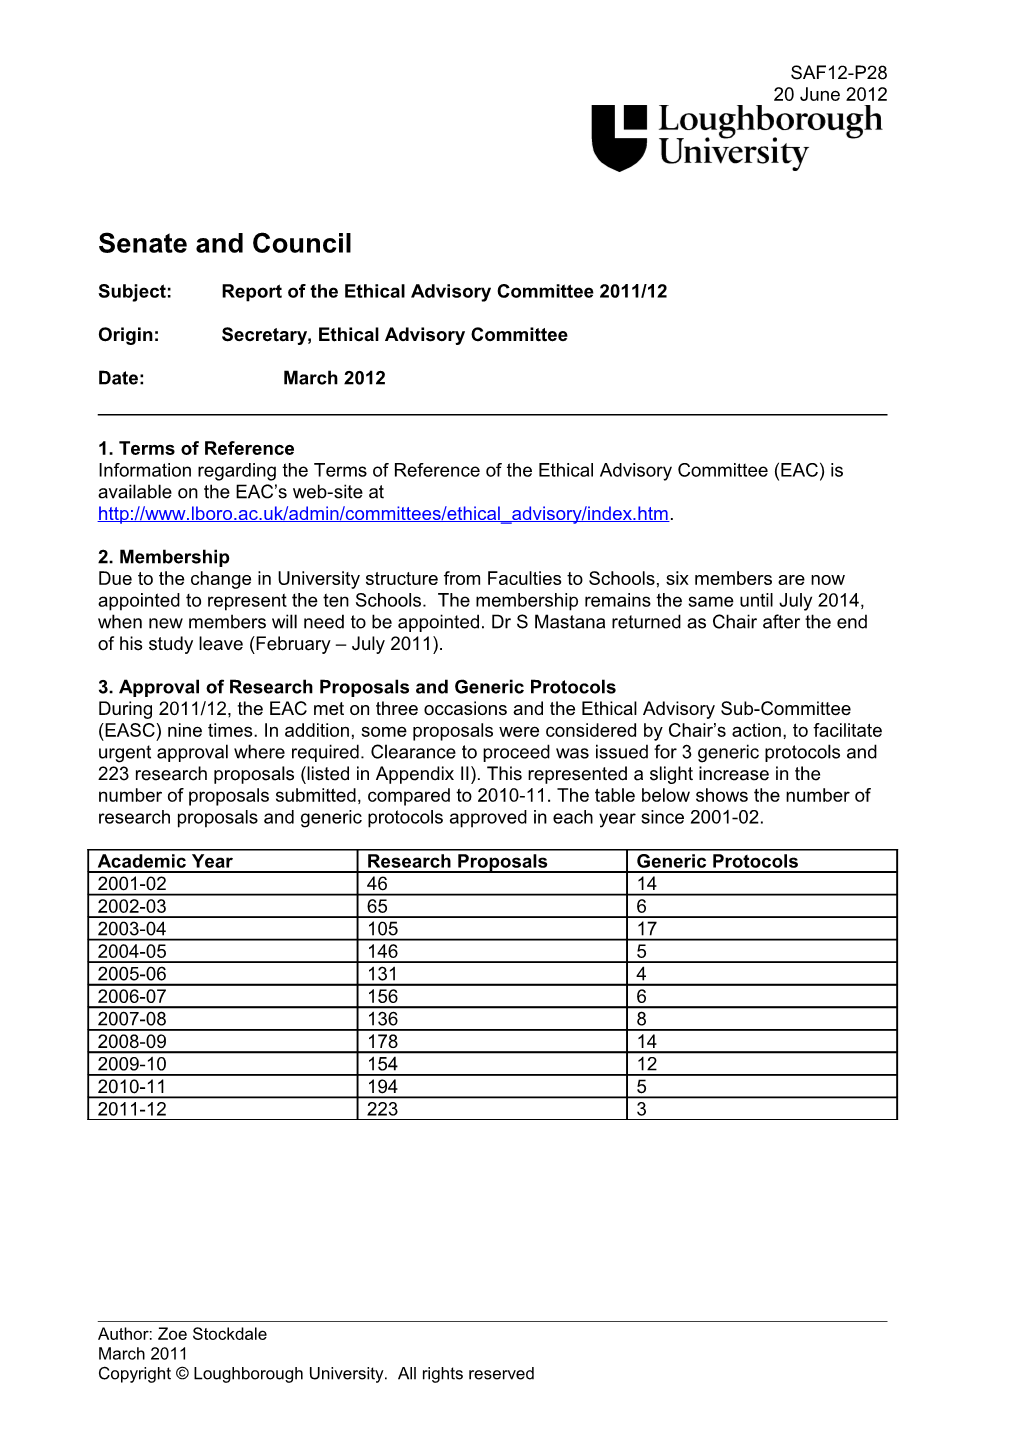 Subject:Report of the Ethical Advisory Committee 2011/12